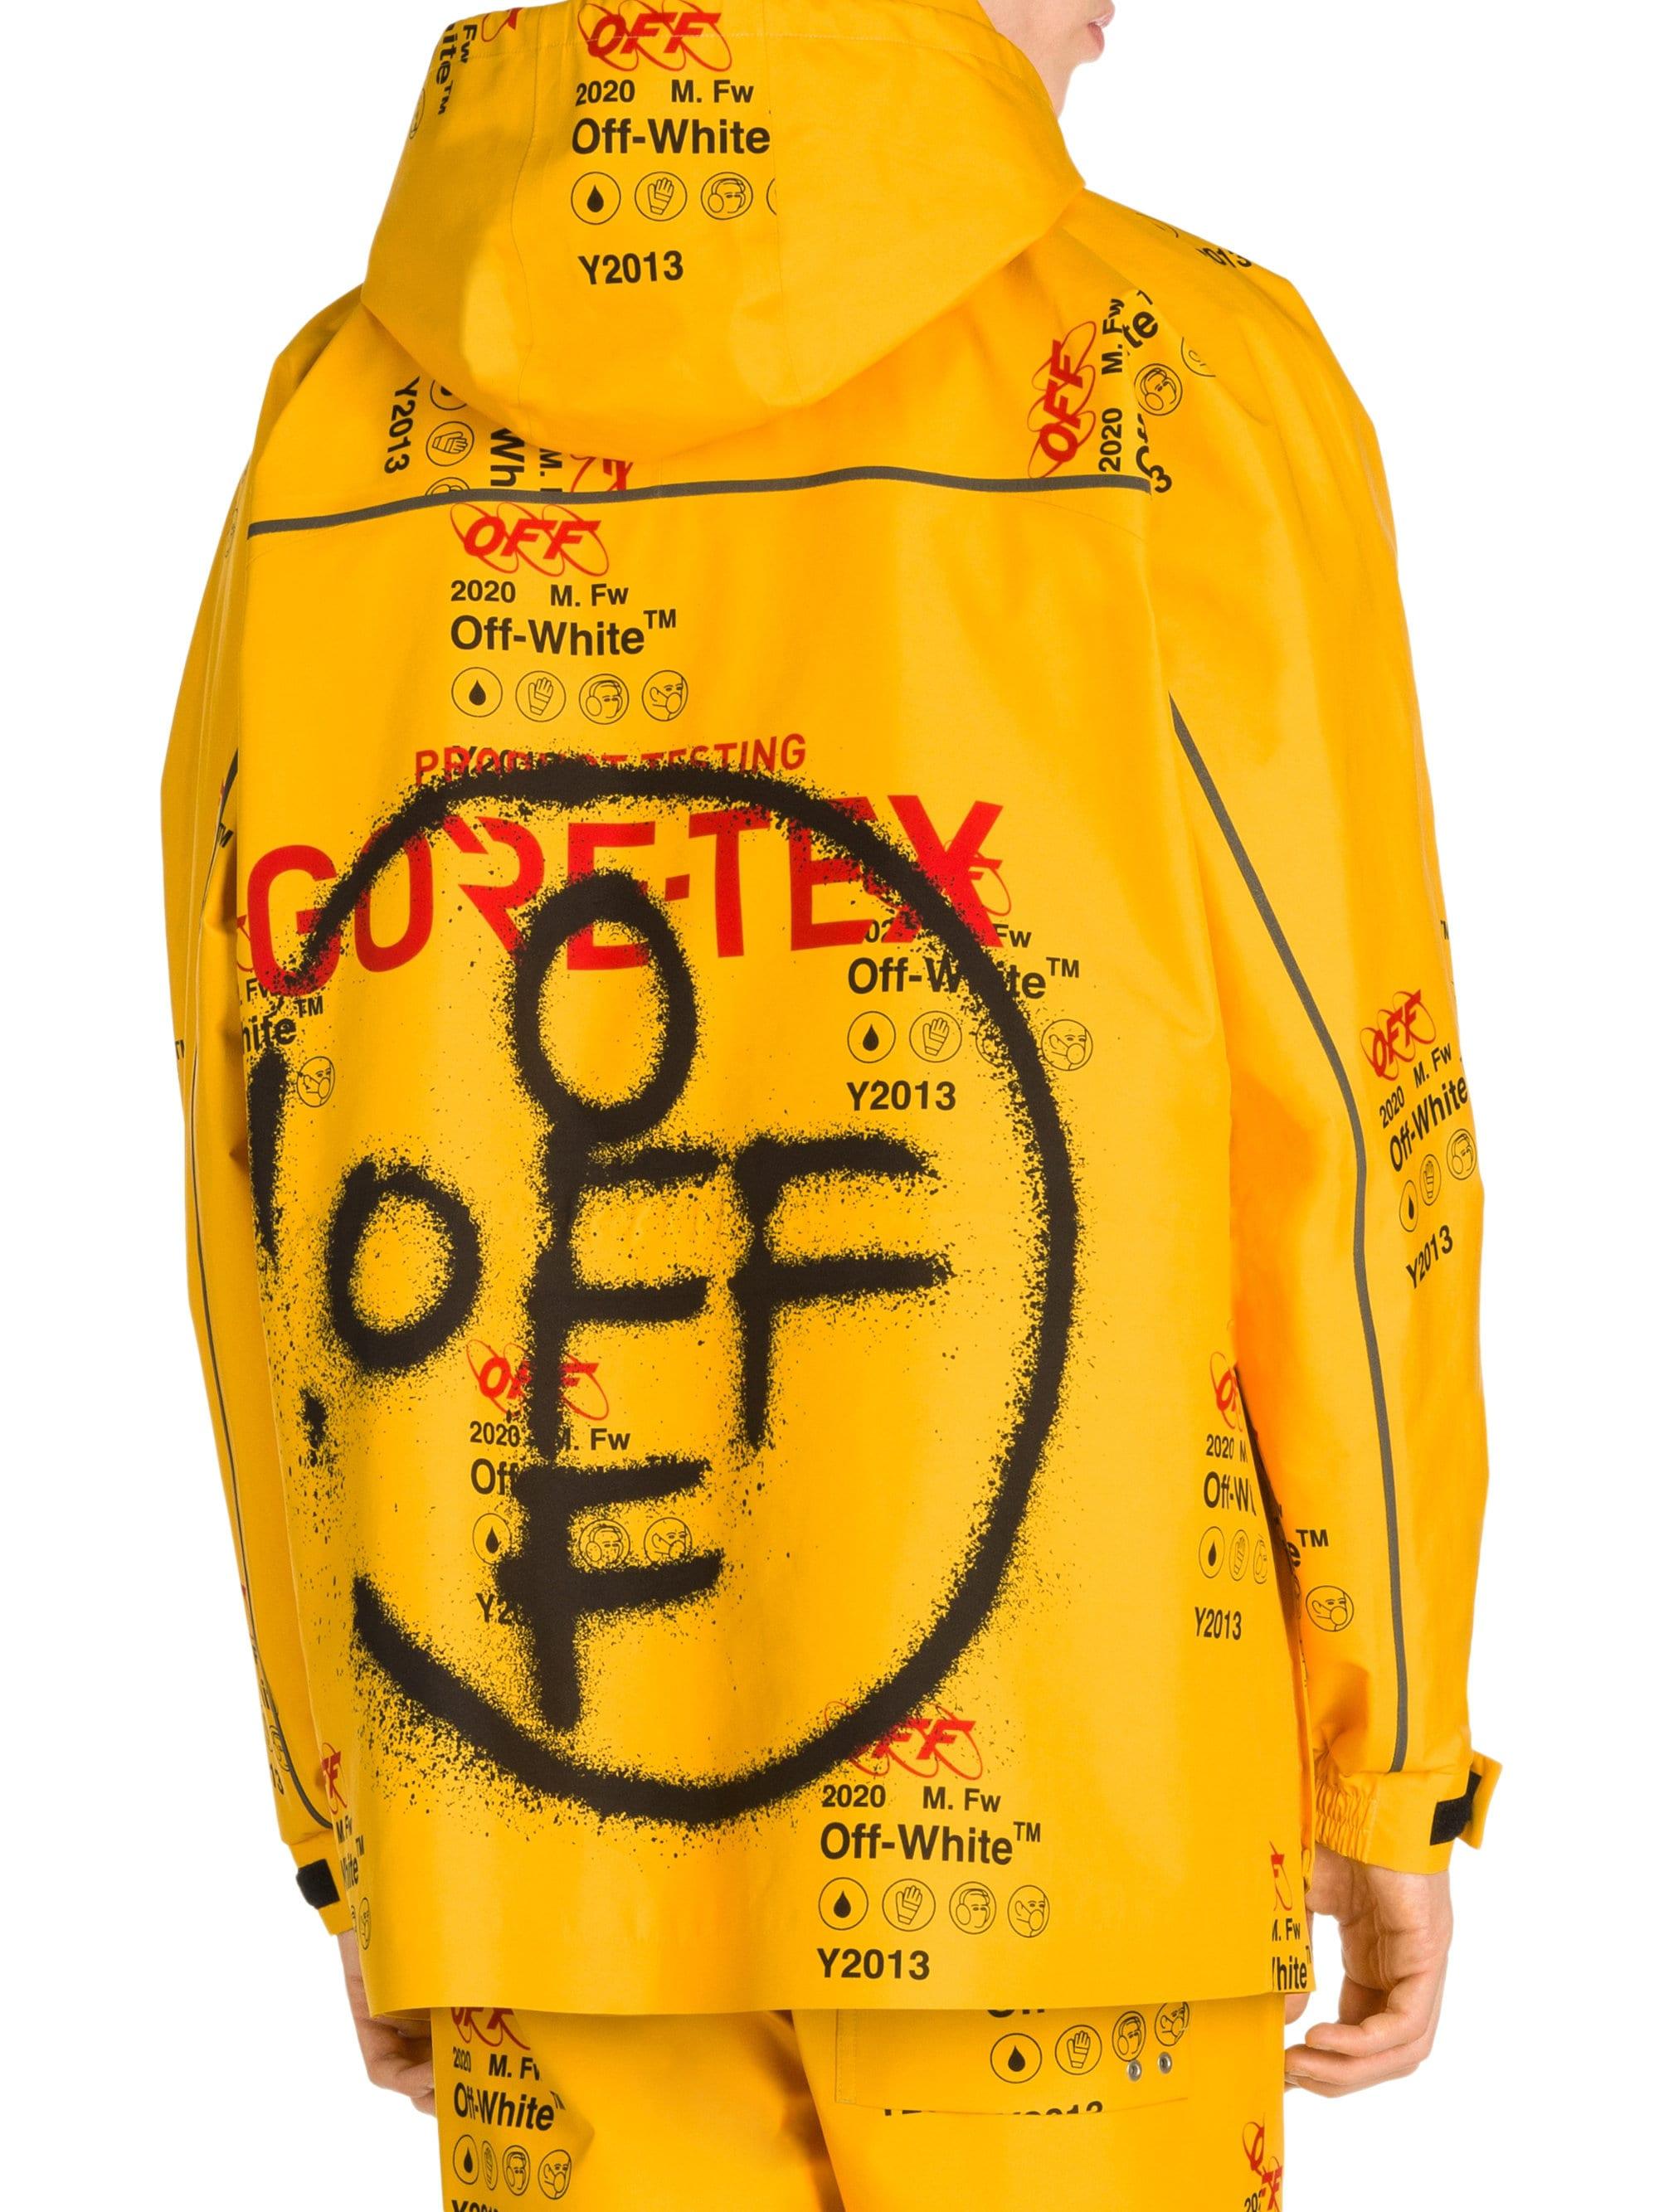 Off-White c/o Virgil Abloh Gore-tex Public Television Ski Jacket in Yellow for Men - Lyst